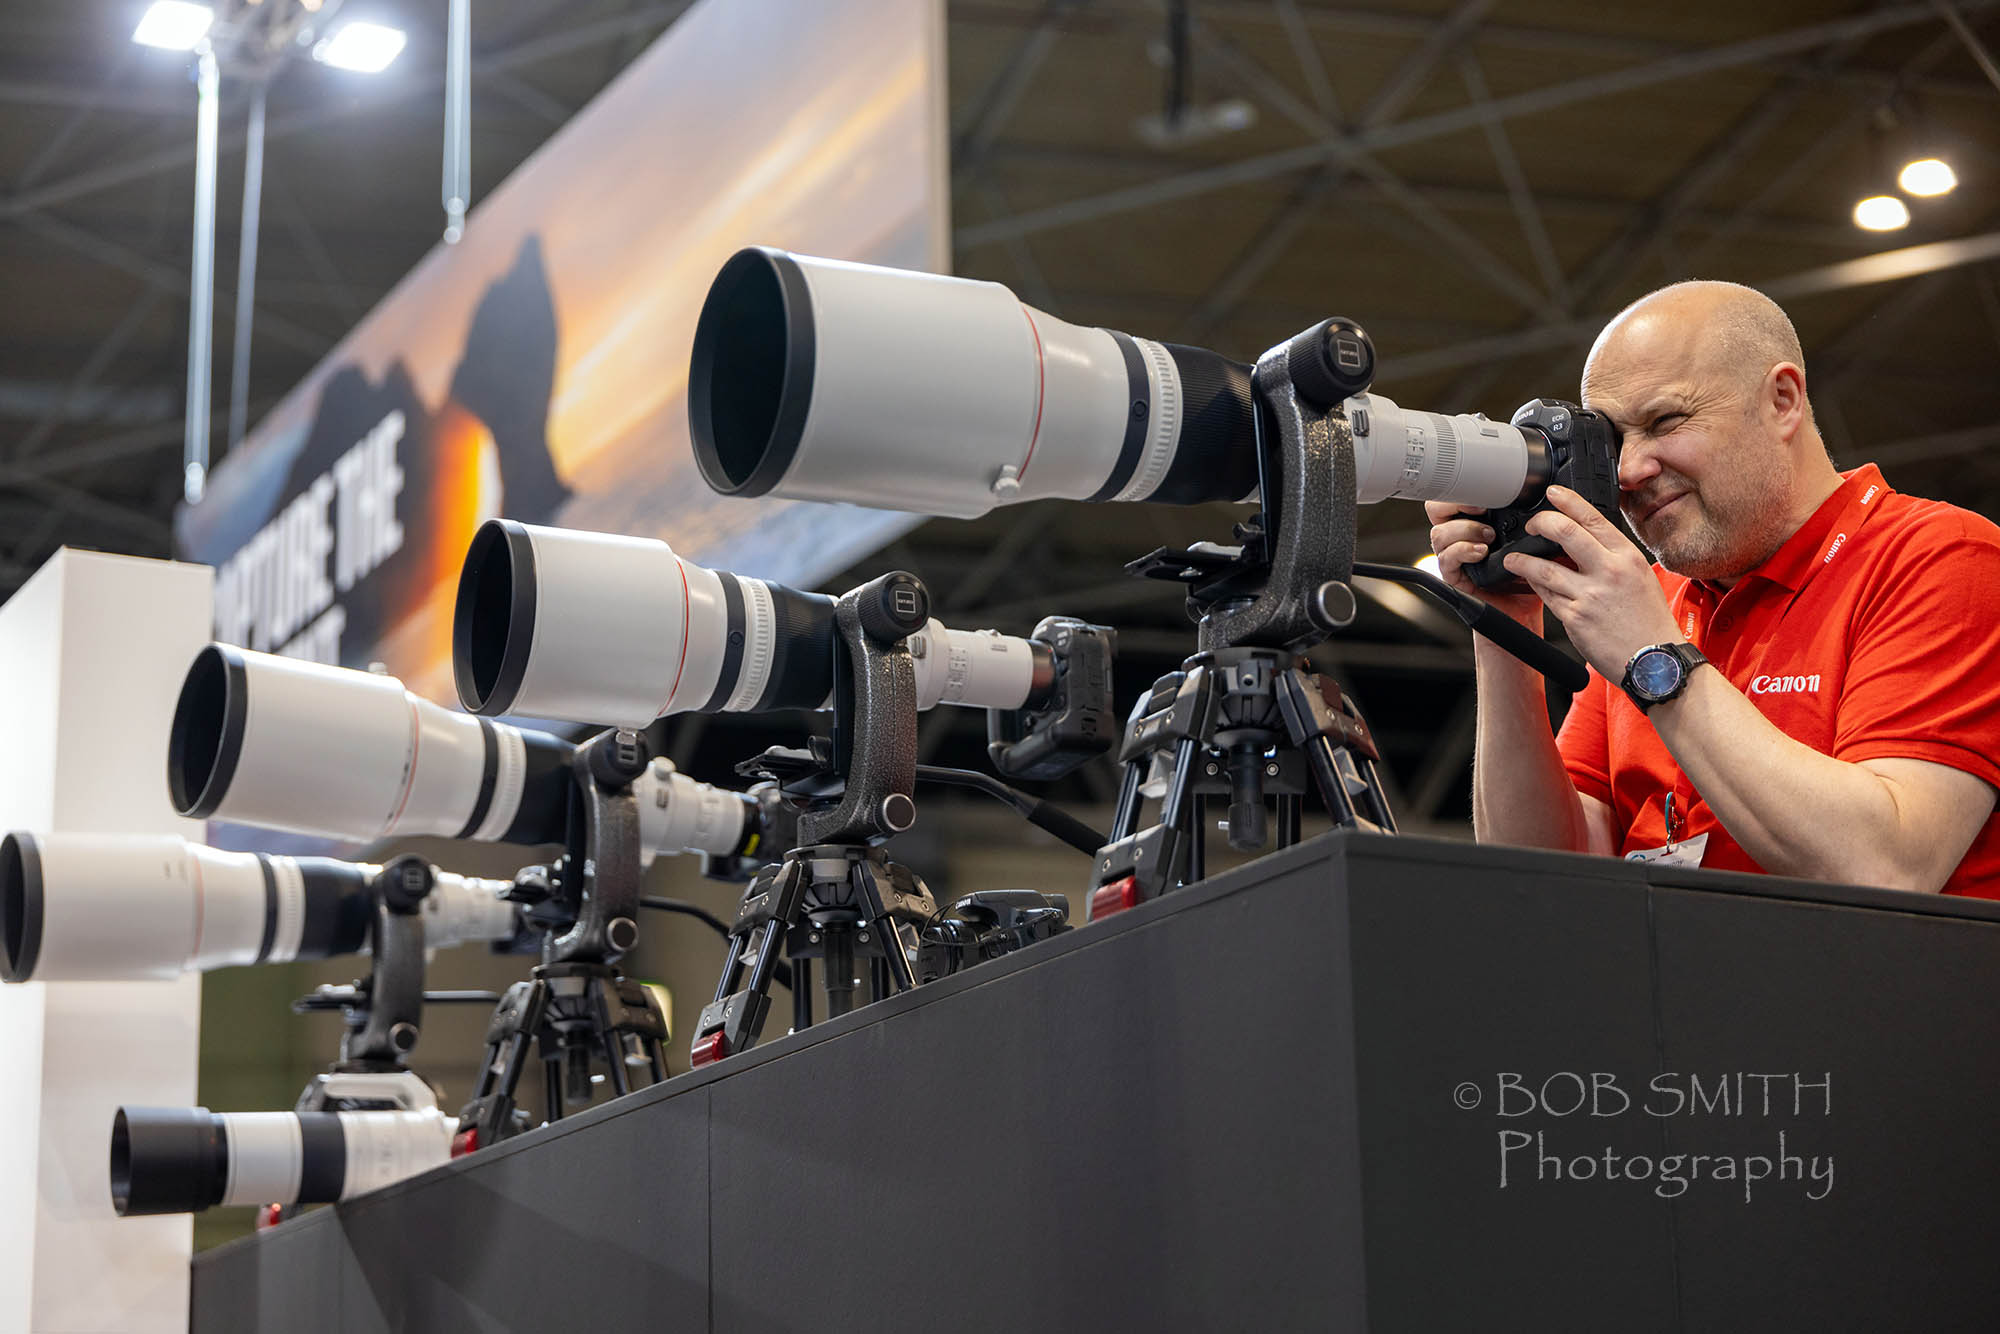 Super telephoto lenses on display at the Photography Show